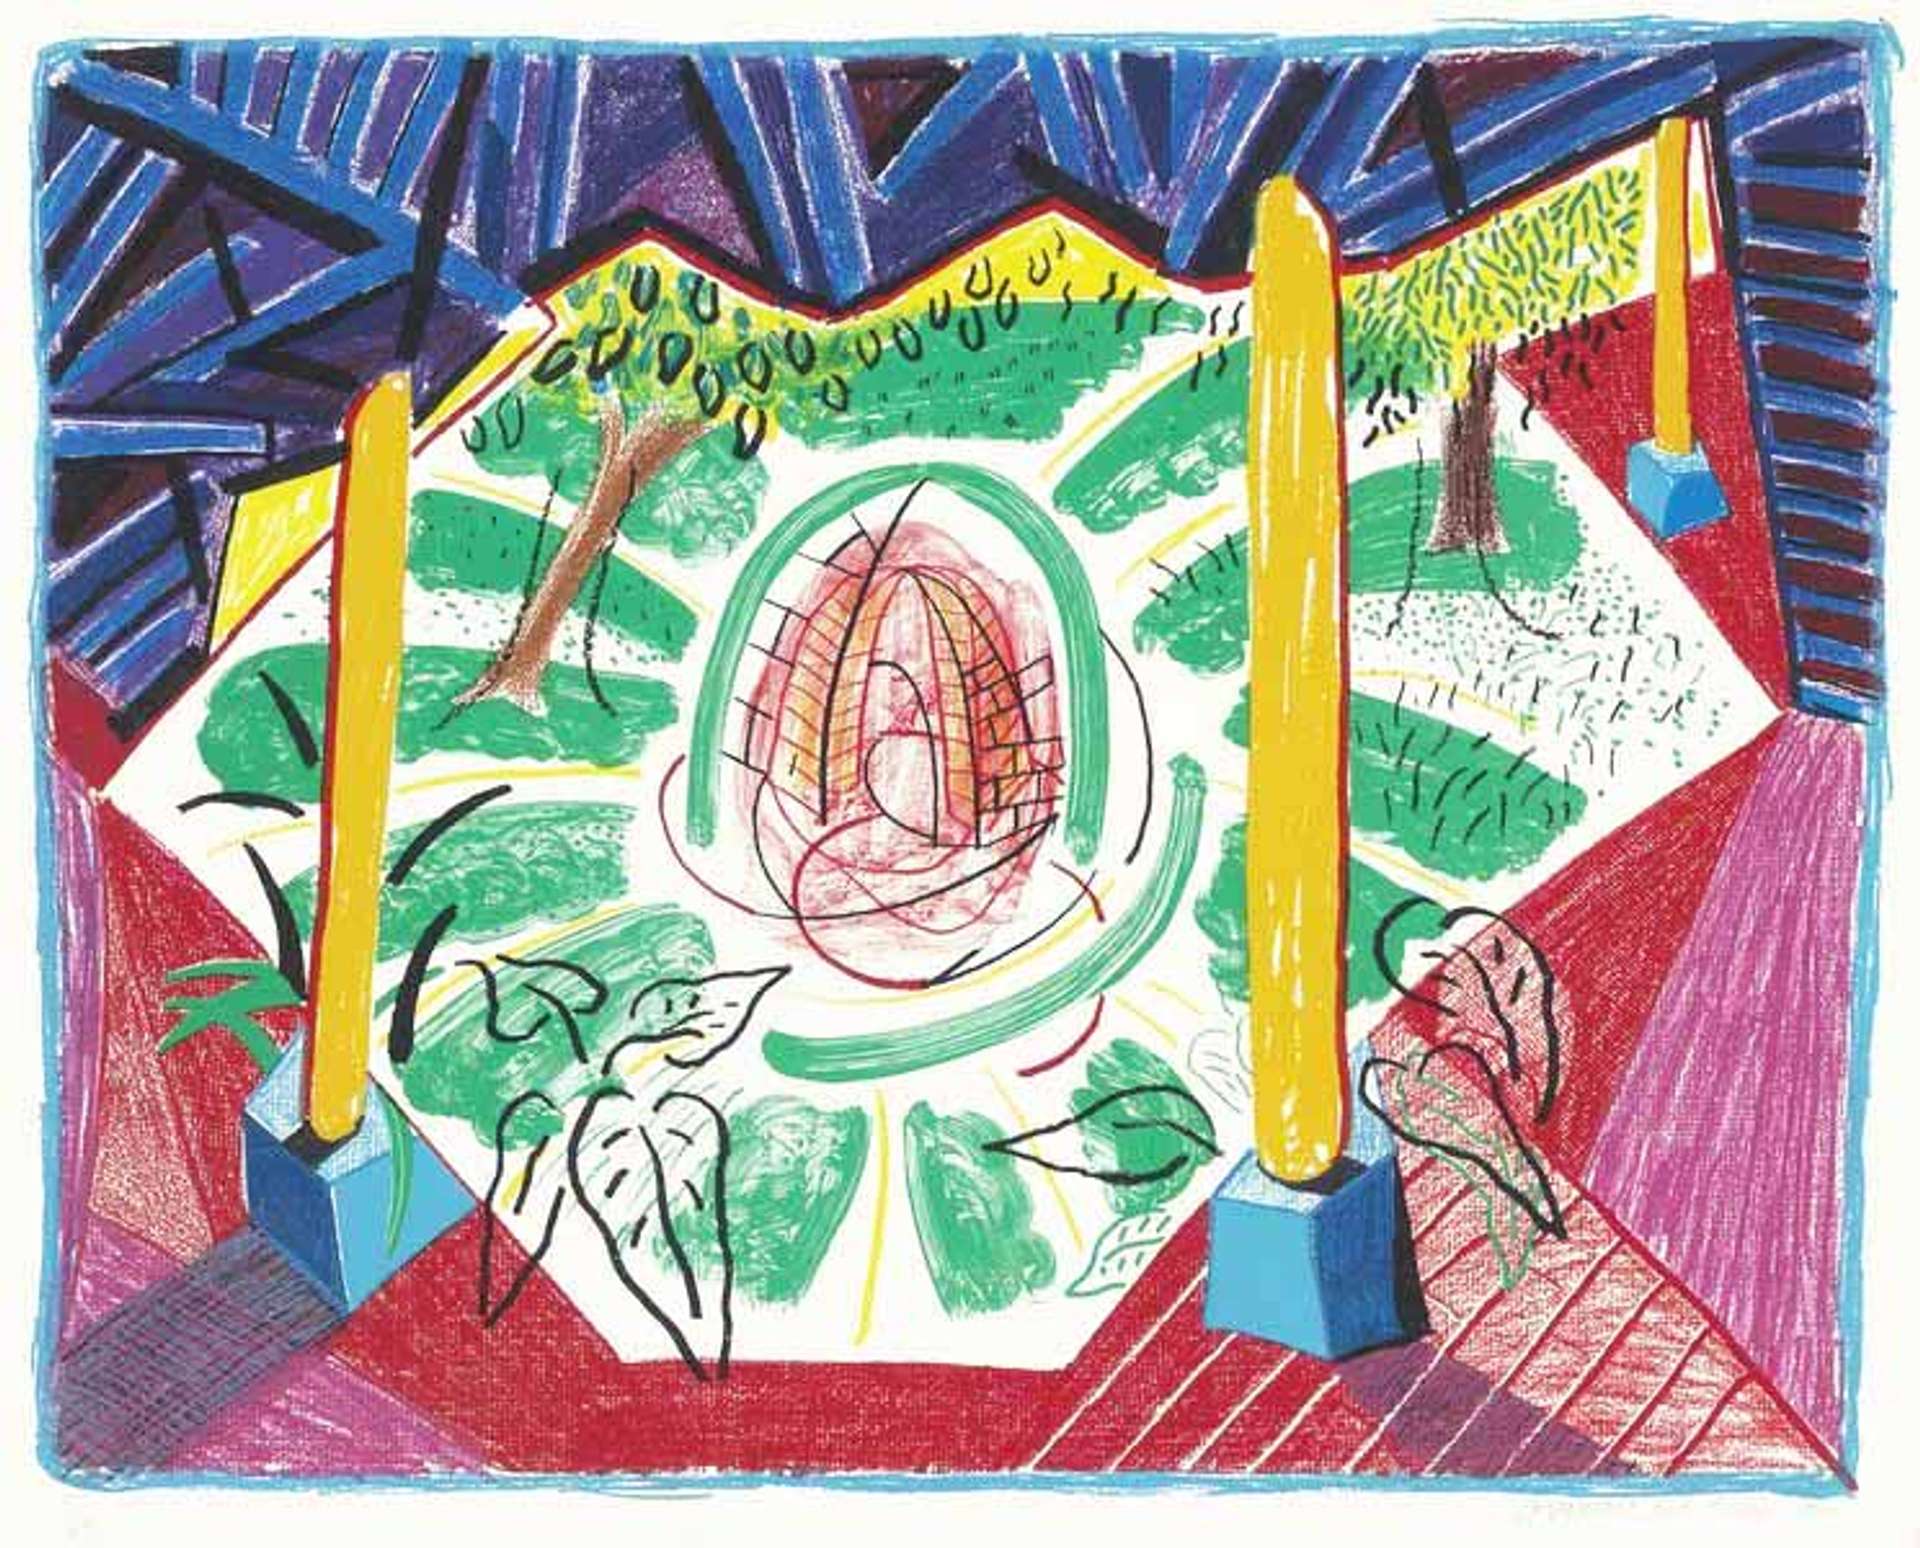 David Hockney’s View Of Hotel Well II. A lithographic print of a panoramic view of an exterior setting of a hotel’s well.